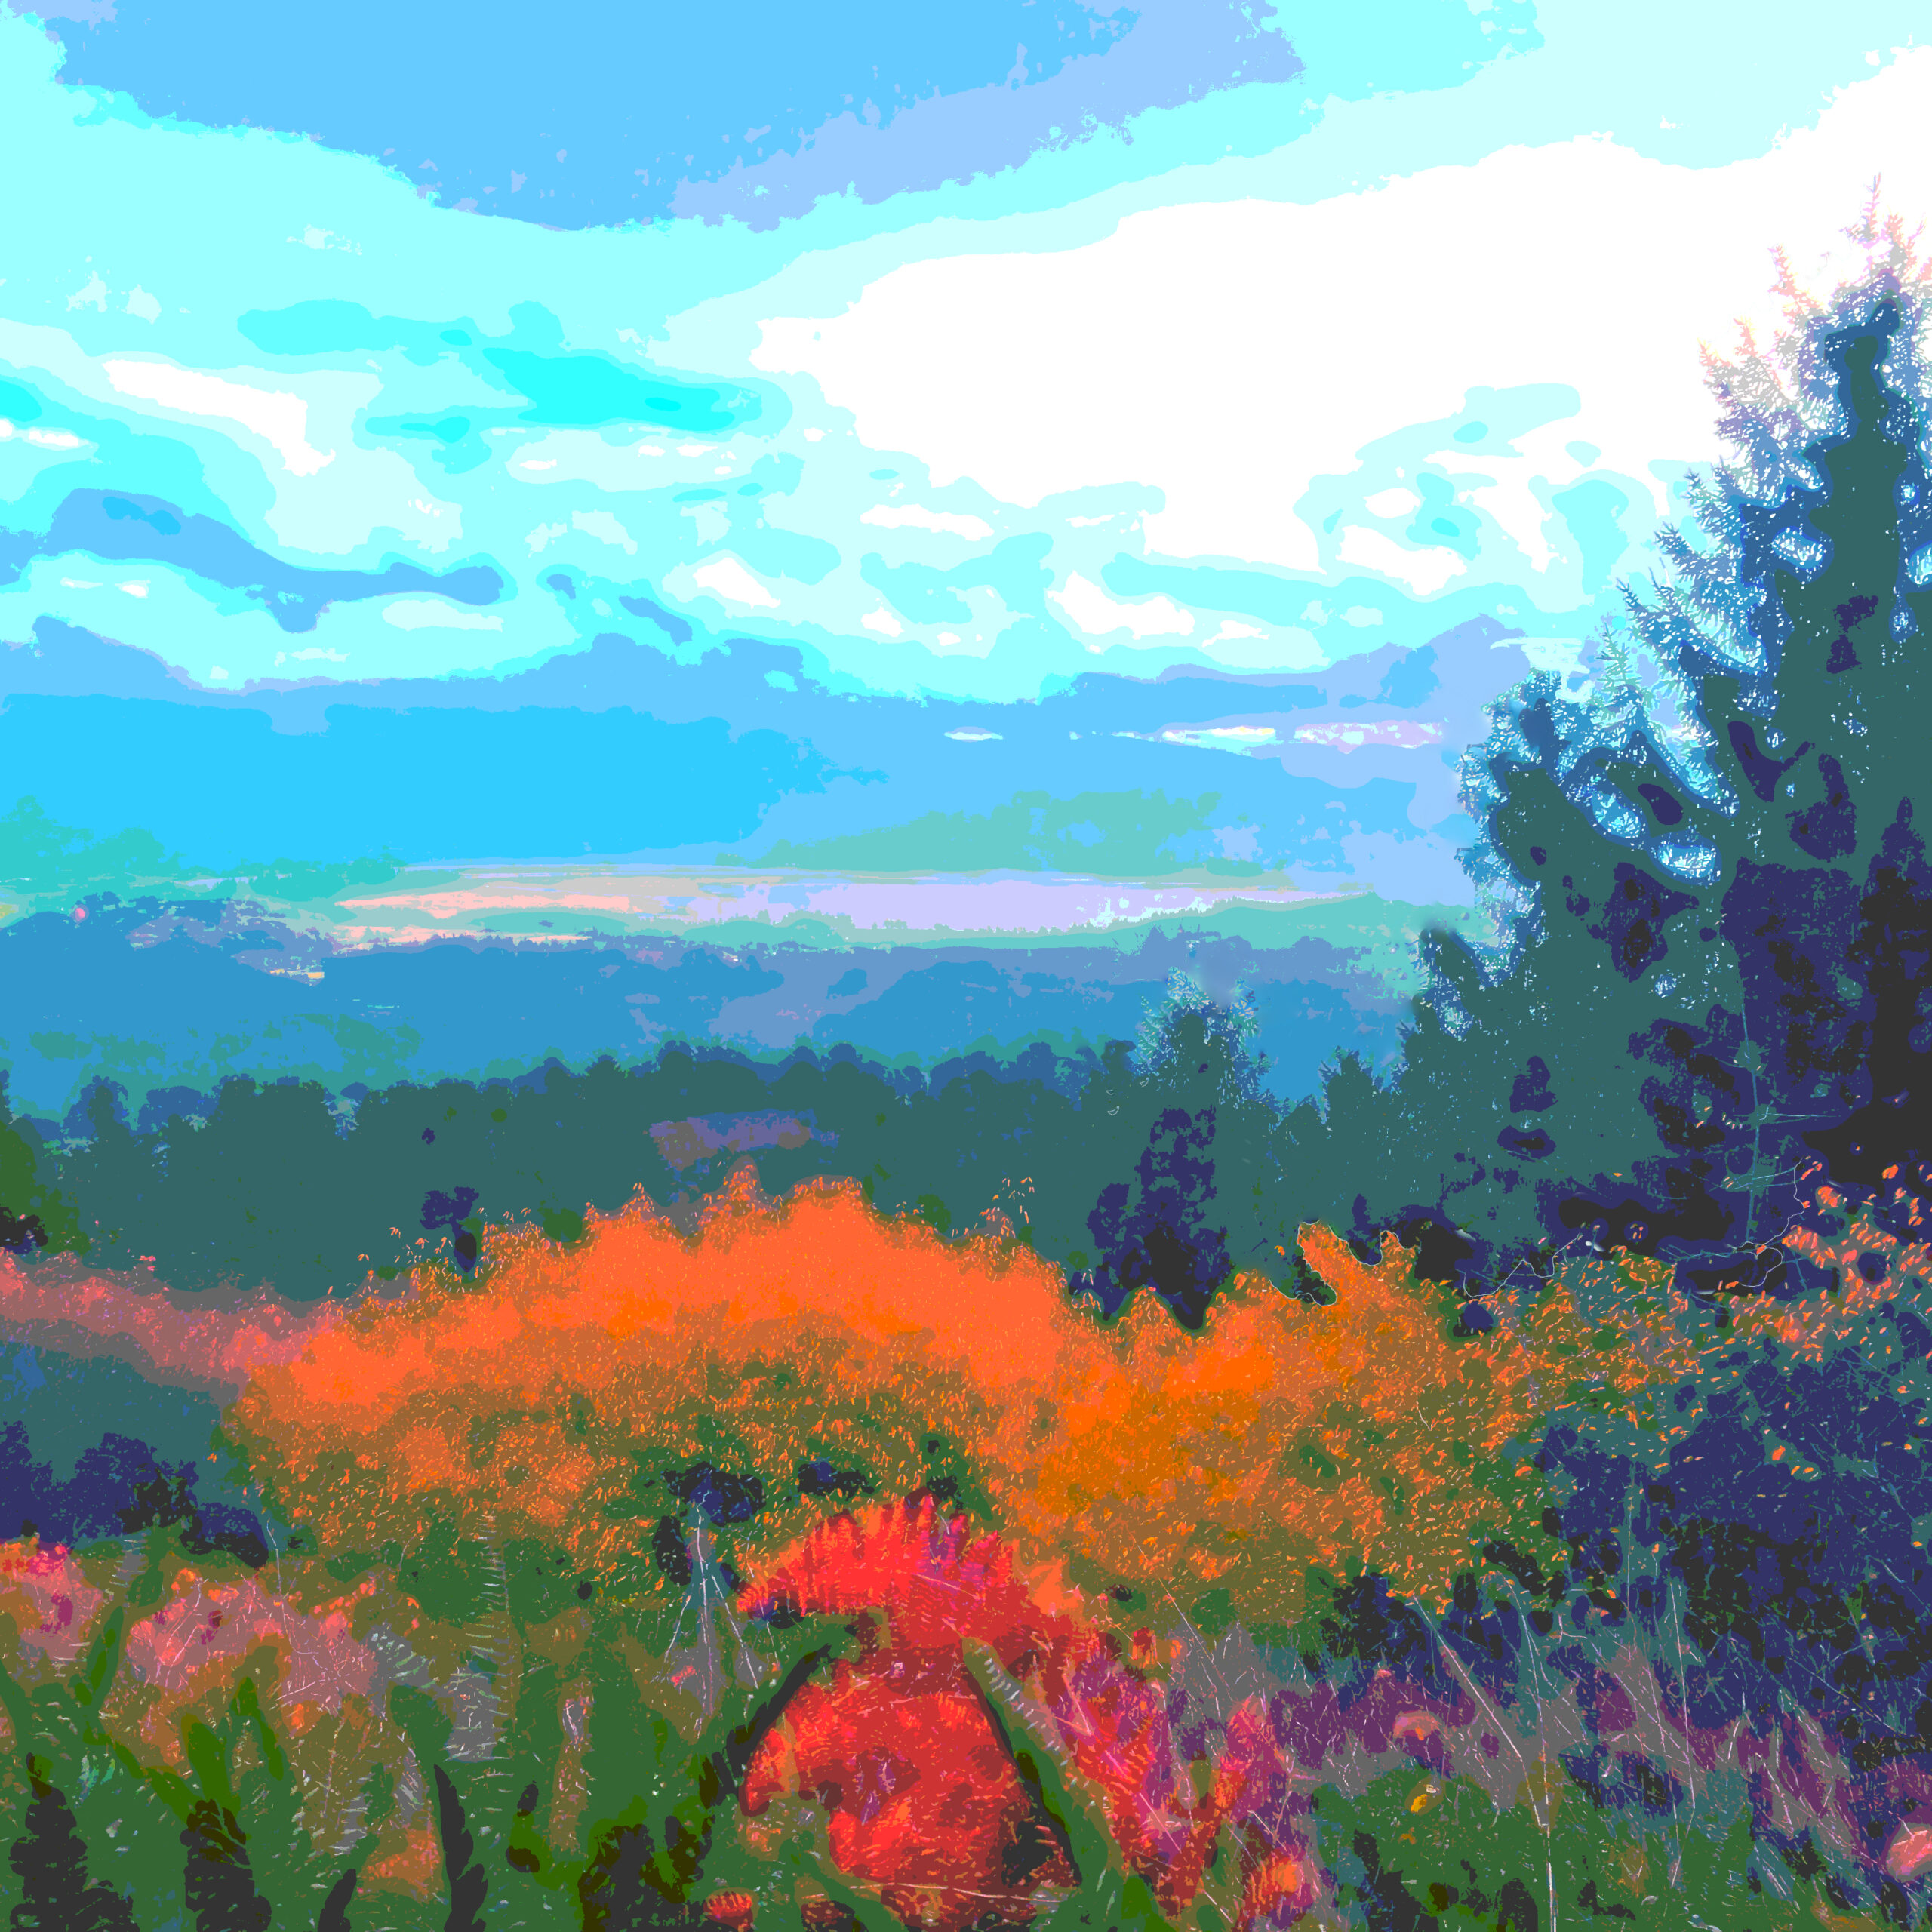 A colorful view of shrubs, trees in the fore ground with clouds, mountains and a body of water in the distance.